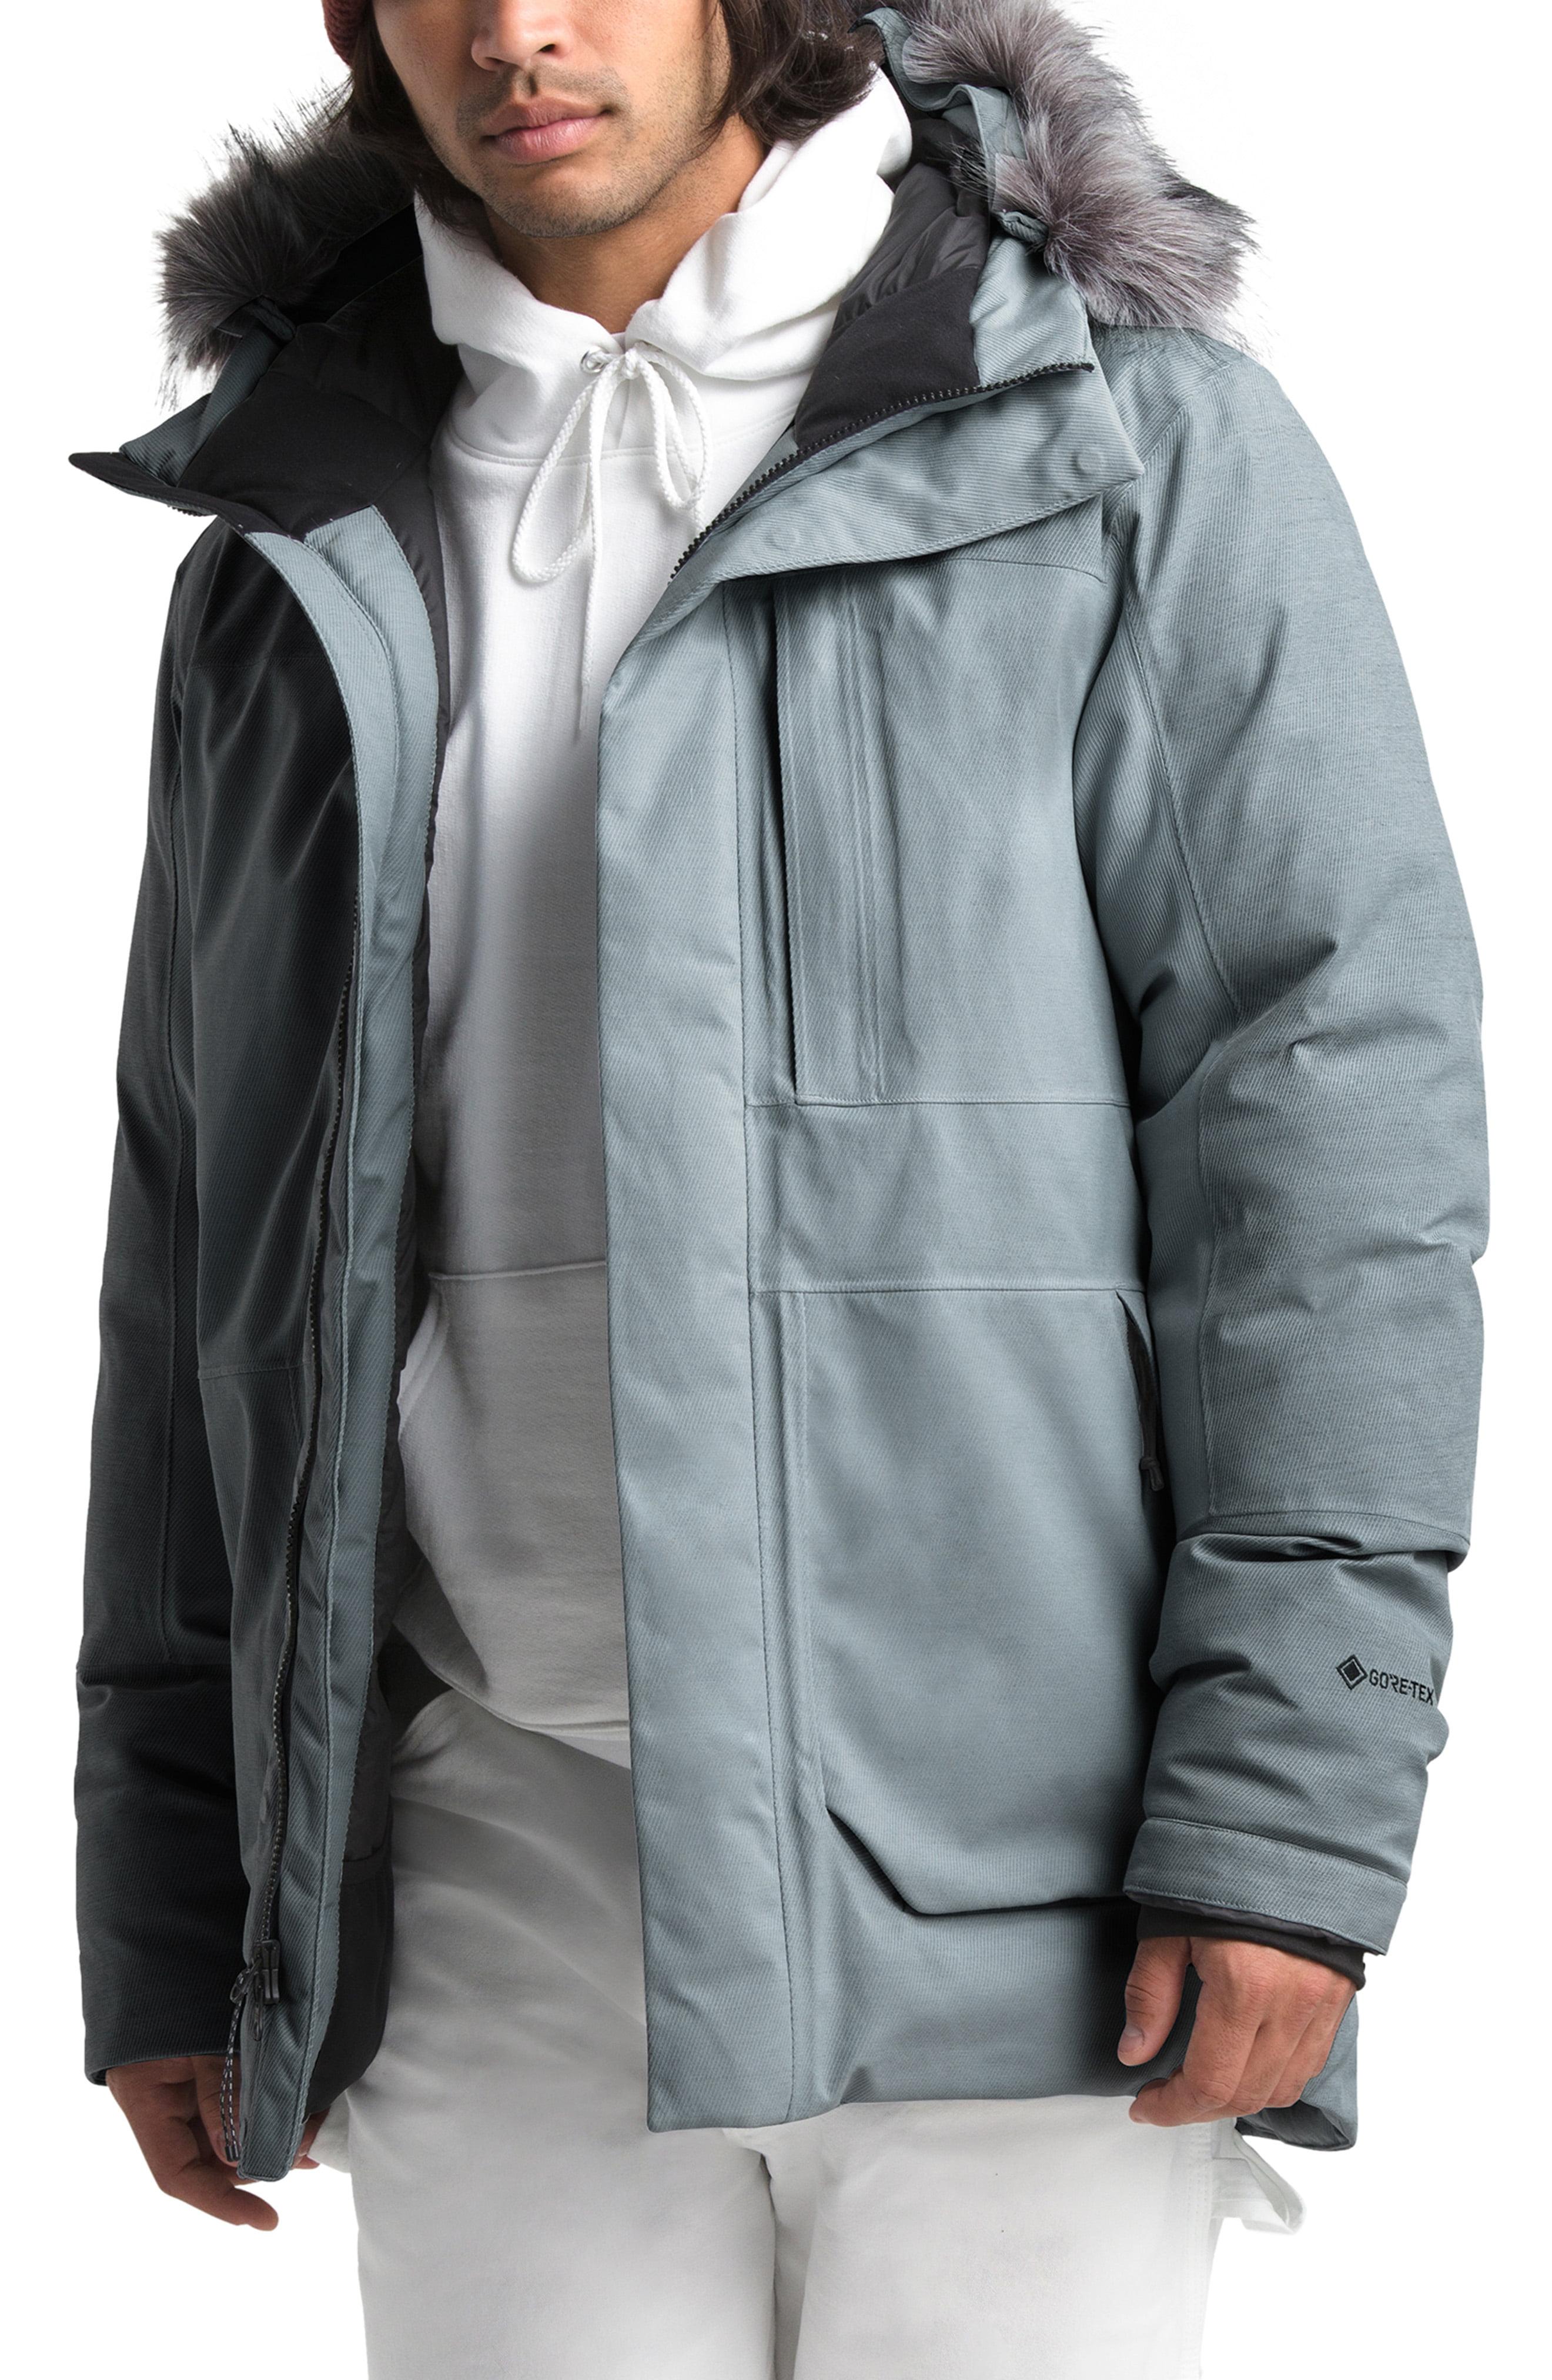 The North Face Defdown Gtx Ii Down Jacket in Mid Grey (Gray) for Men - Lyst